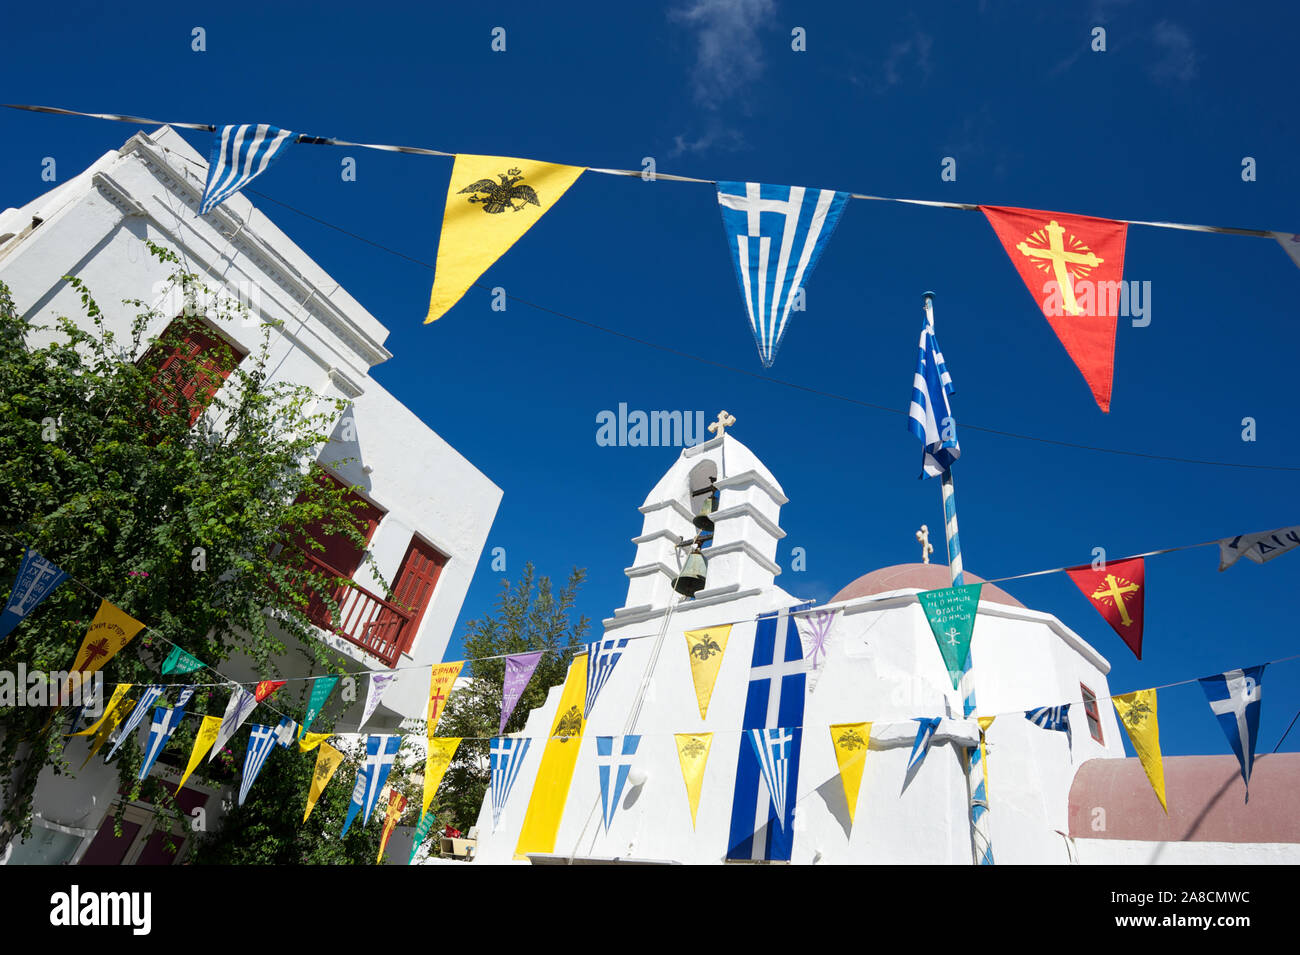 Bright sunny view of plaza decorated with pennant flag bunting representing Greece, the Byzantine Empire, and the Greek Orthodox Church in Mykonos Stock Photo